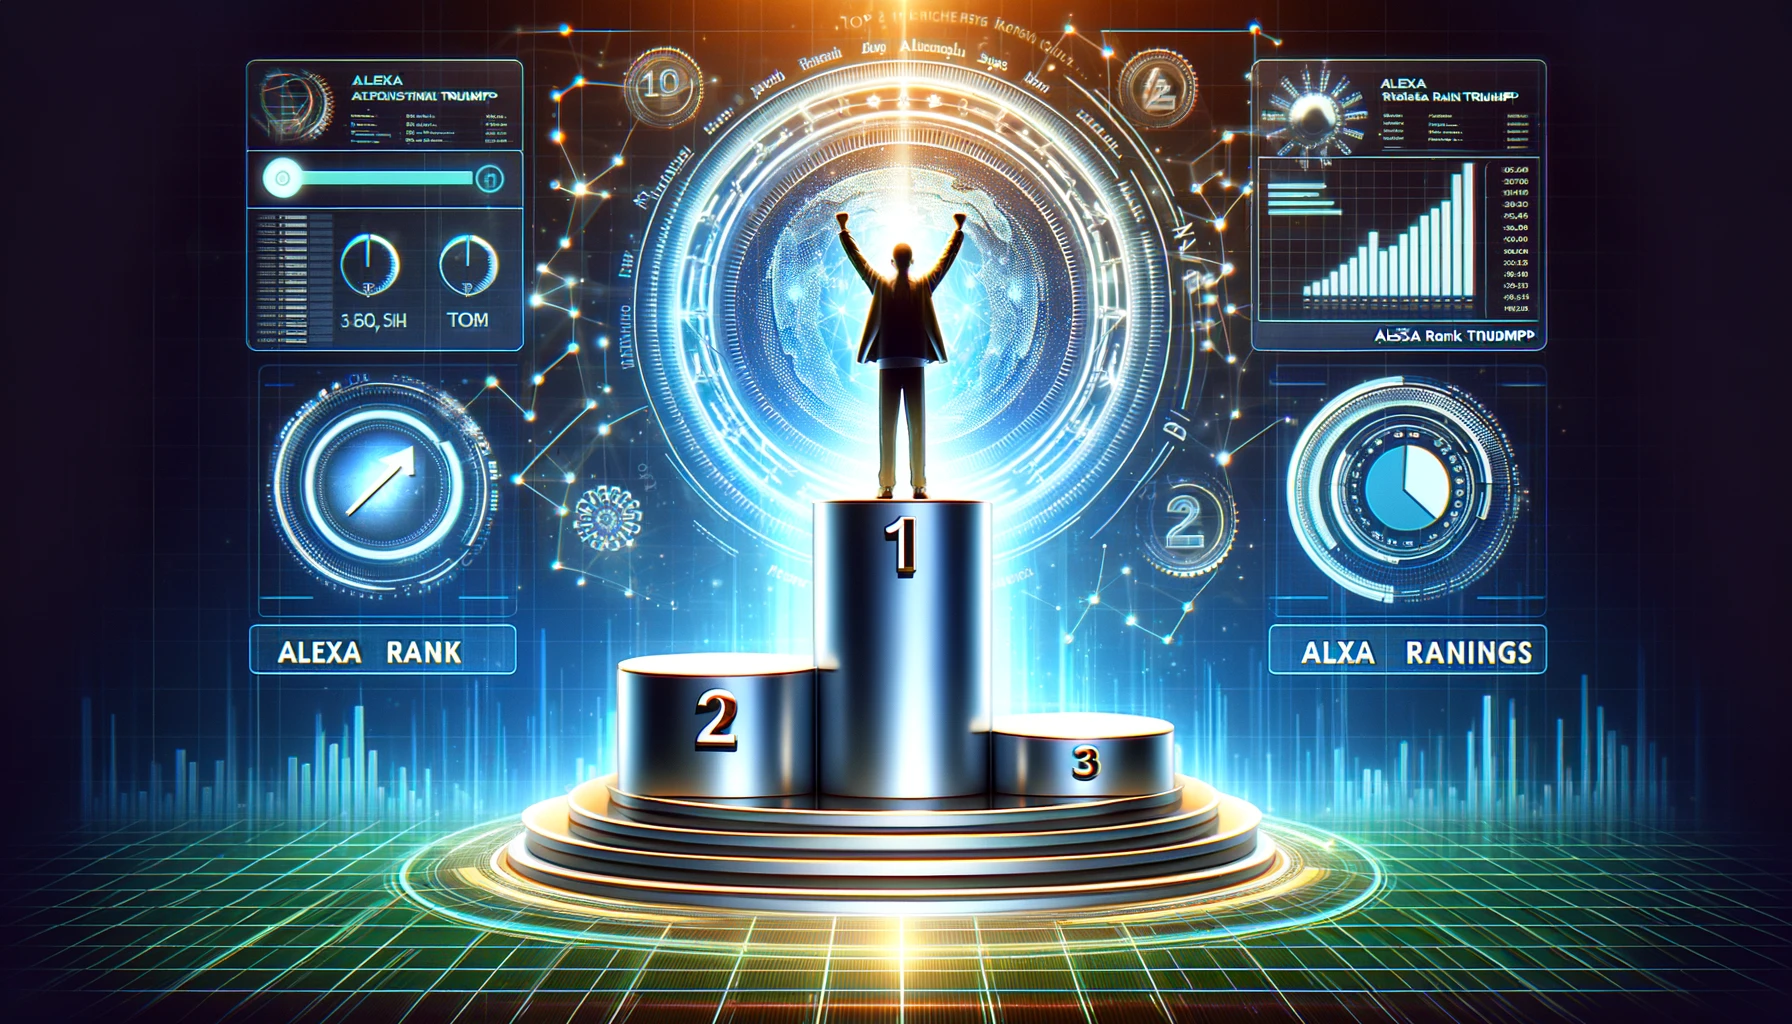 A victory podium in a digital realm, symbolizing Alexa Rank Triumph by achieving a high rank and digital authority. The highest platform, indicative of top Alexa rank, stands out prominently against a futuristic, digital background, illustrating the achievement of online success.